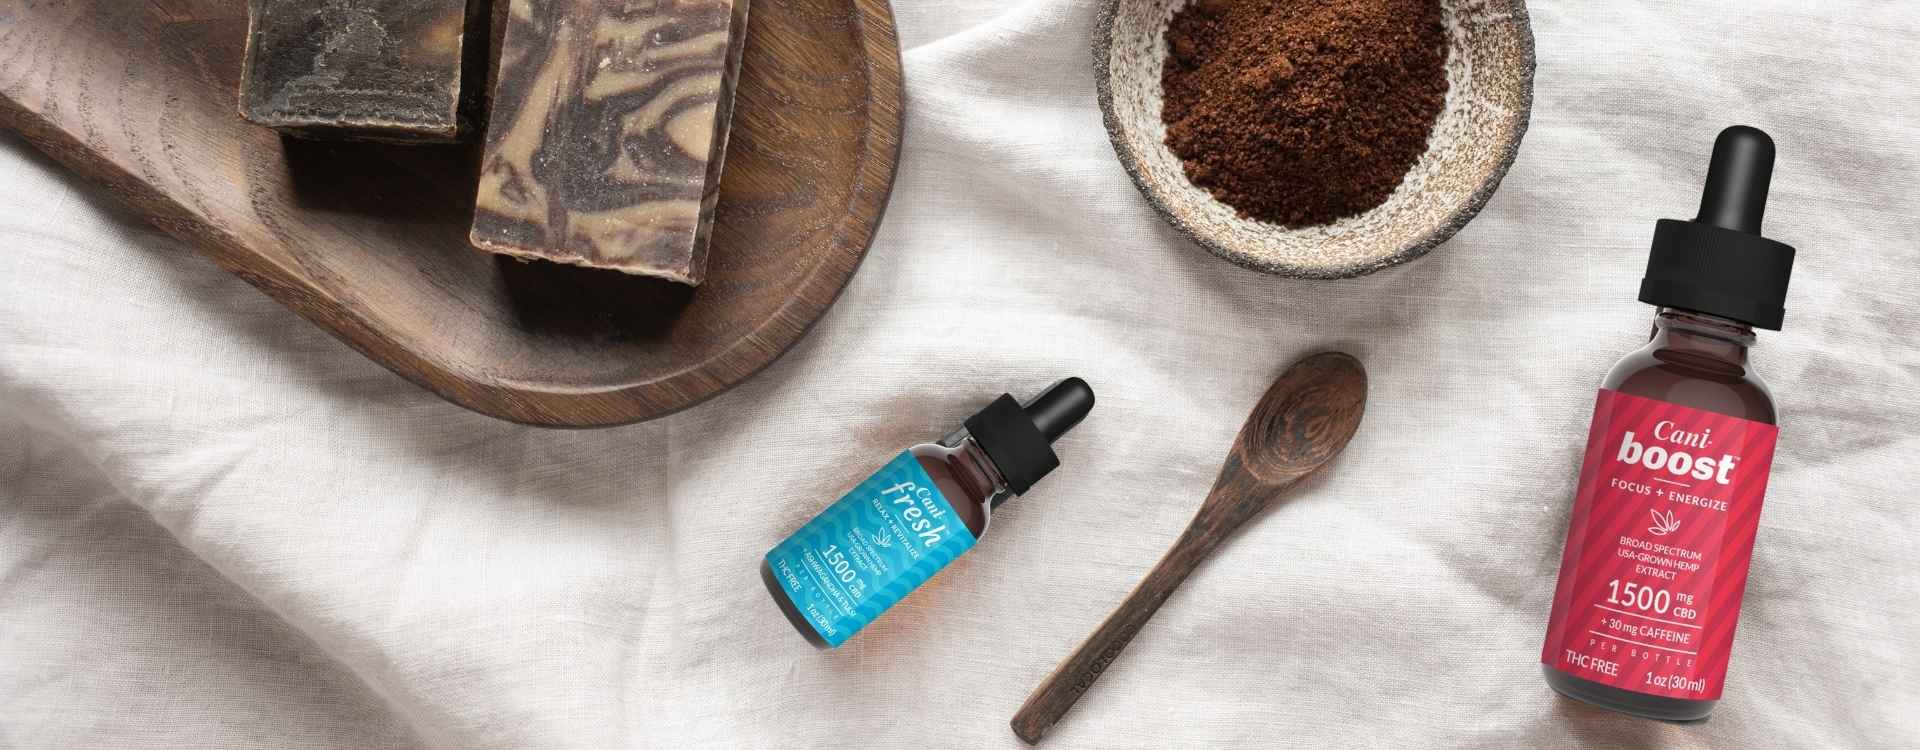 Alt=“CBD oil tincture for relaxation and CBD oil tincture with energy boost next to spoon, coffee powder and soap bars”